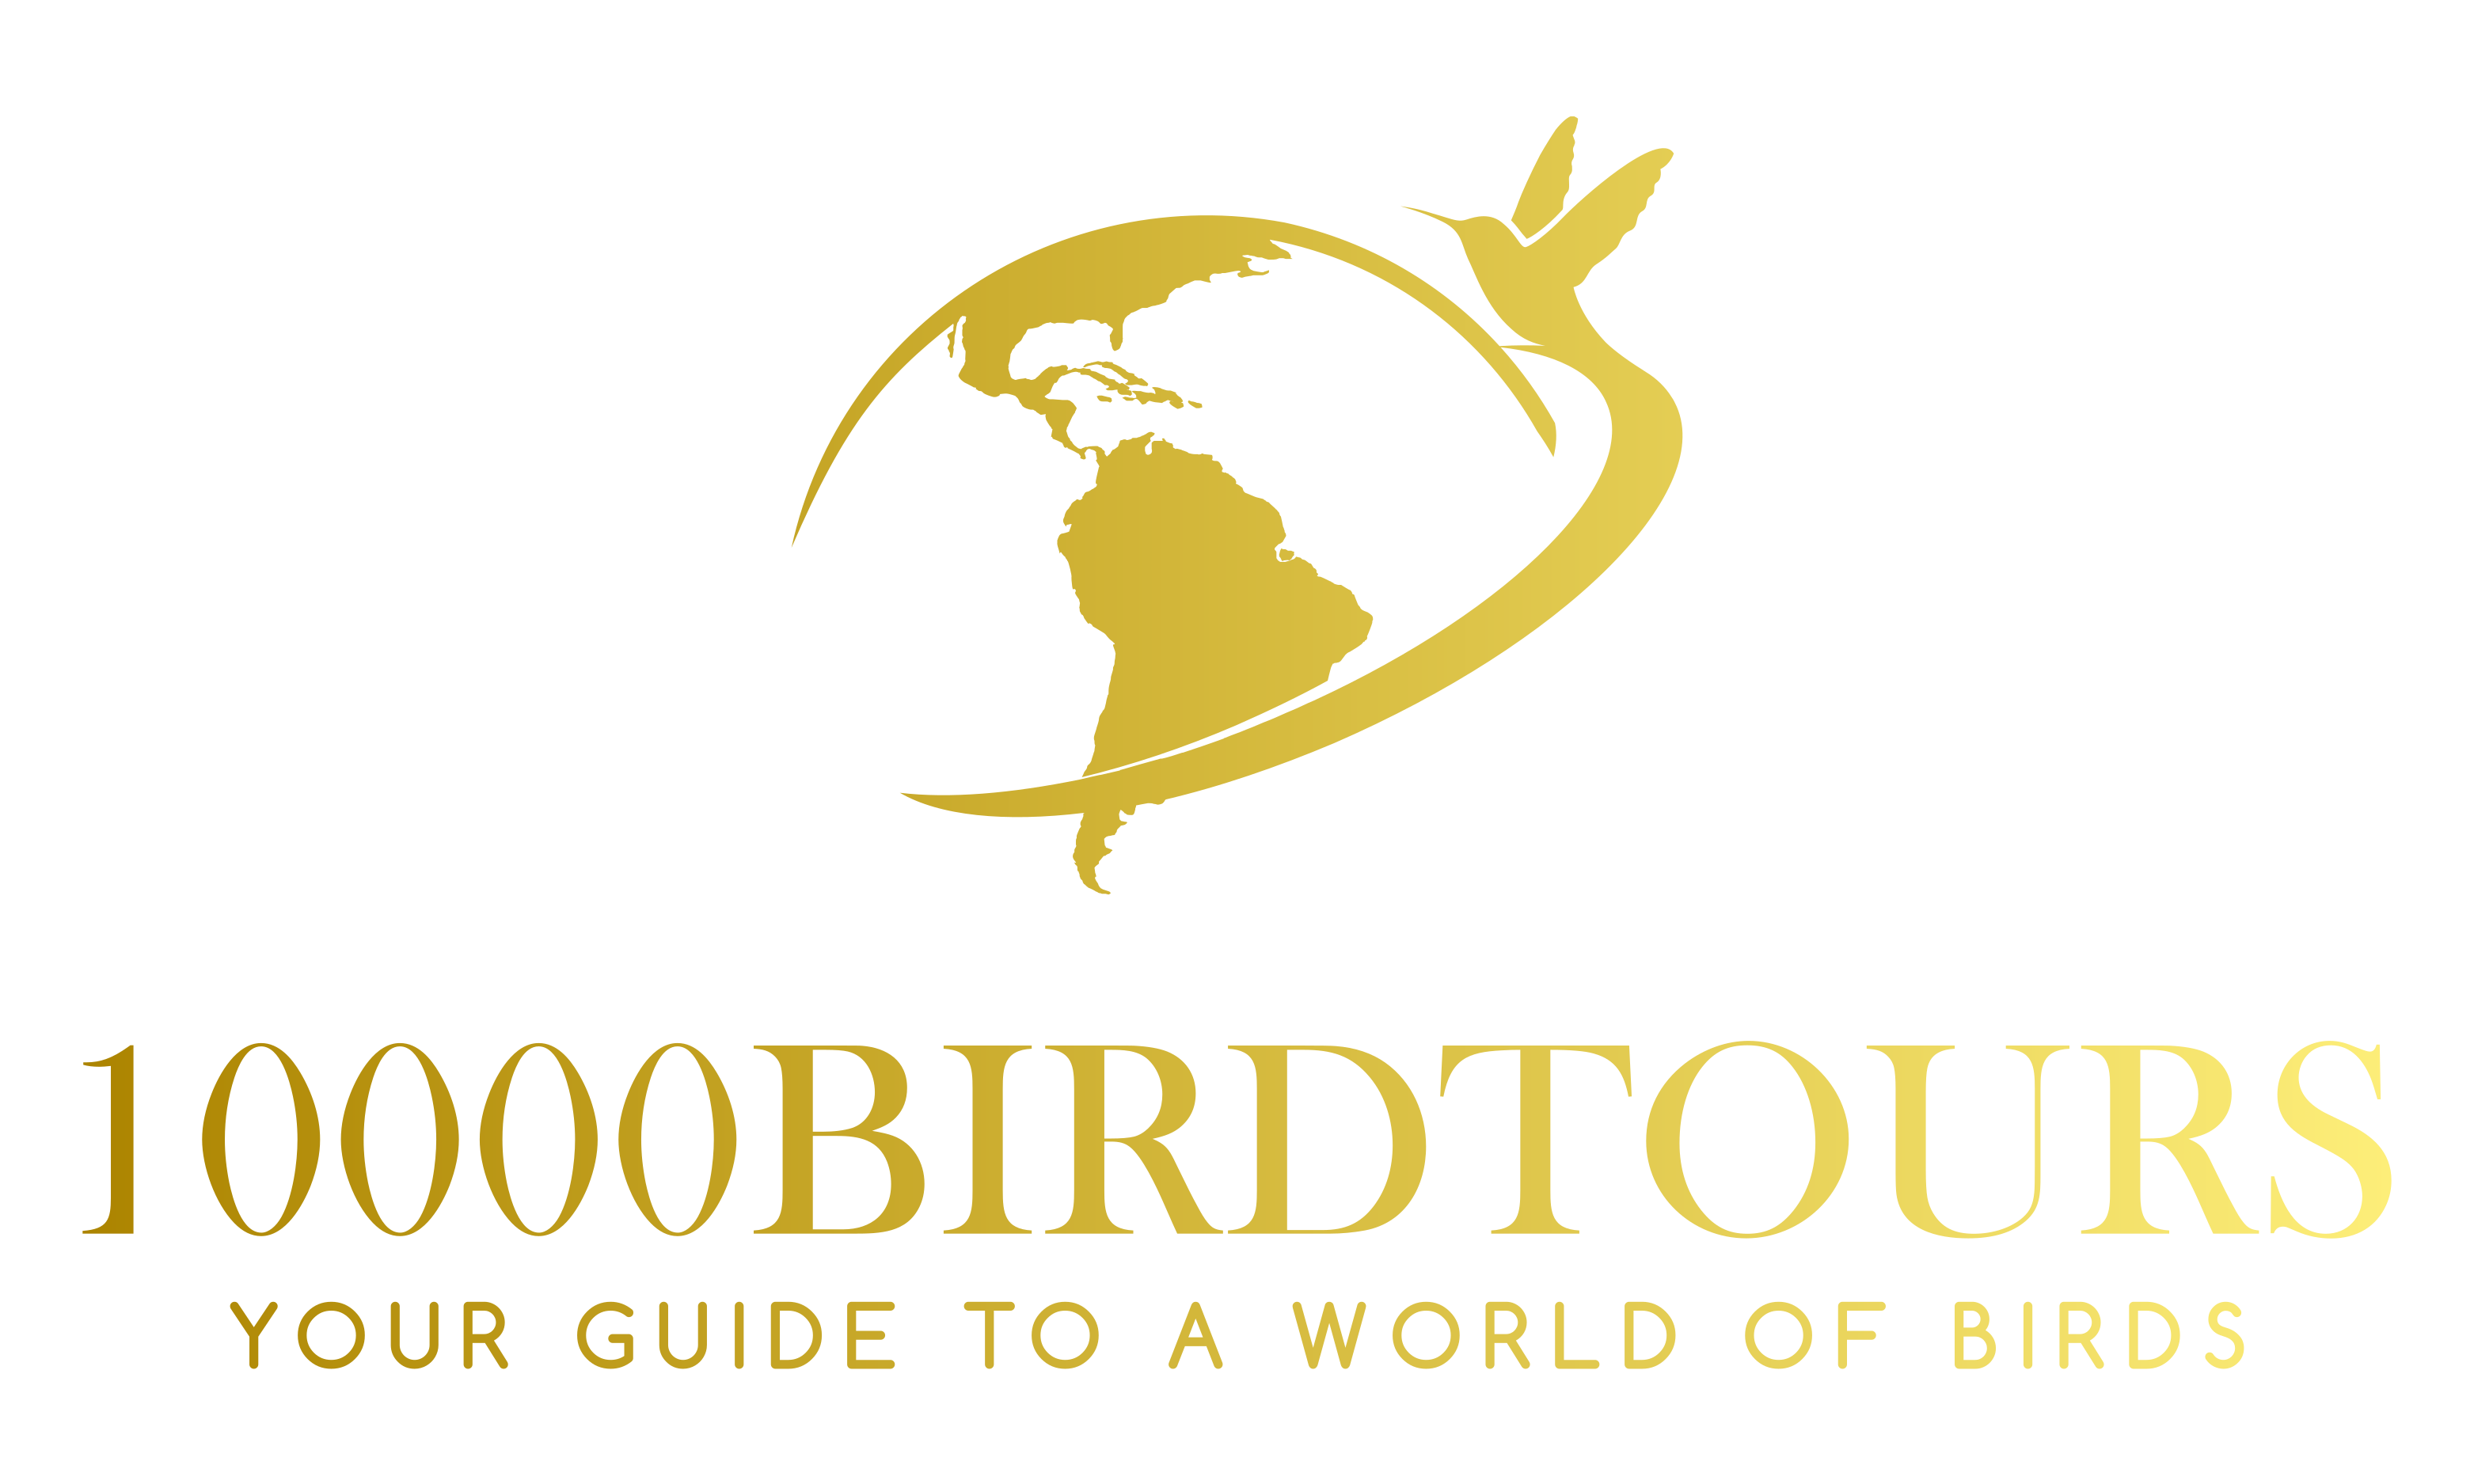 Your Guide to a World of Birds